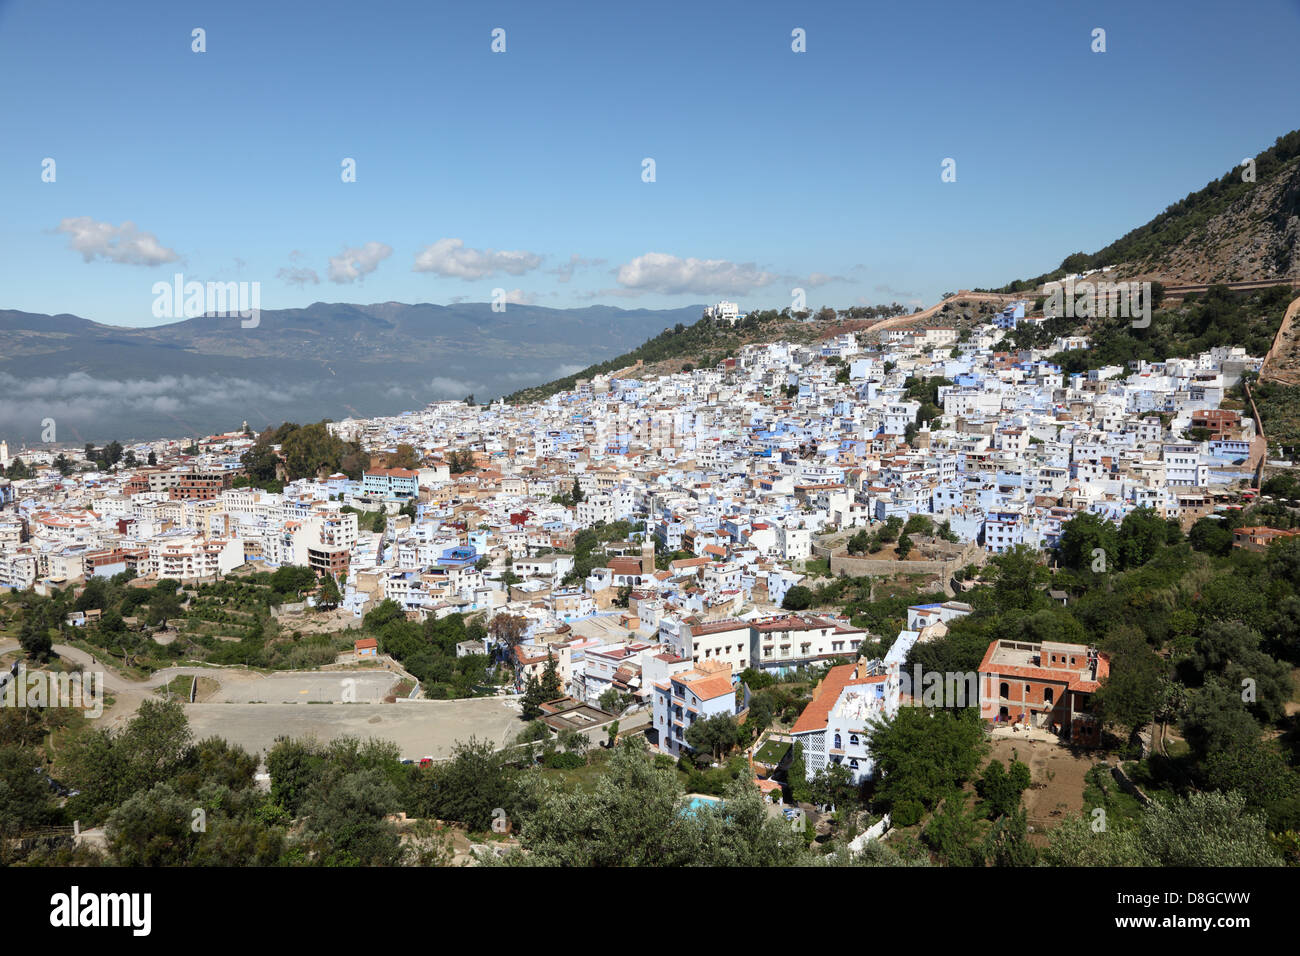 Blue white town Chefchaouen in Morocco Stock Photo